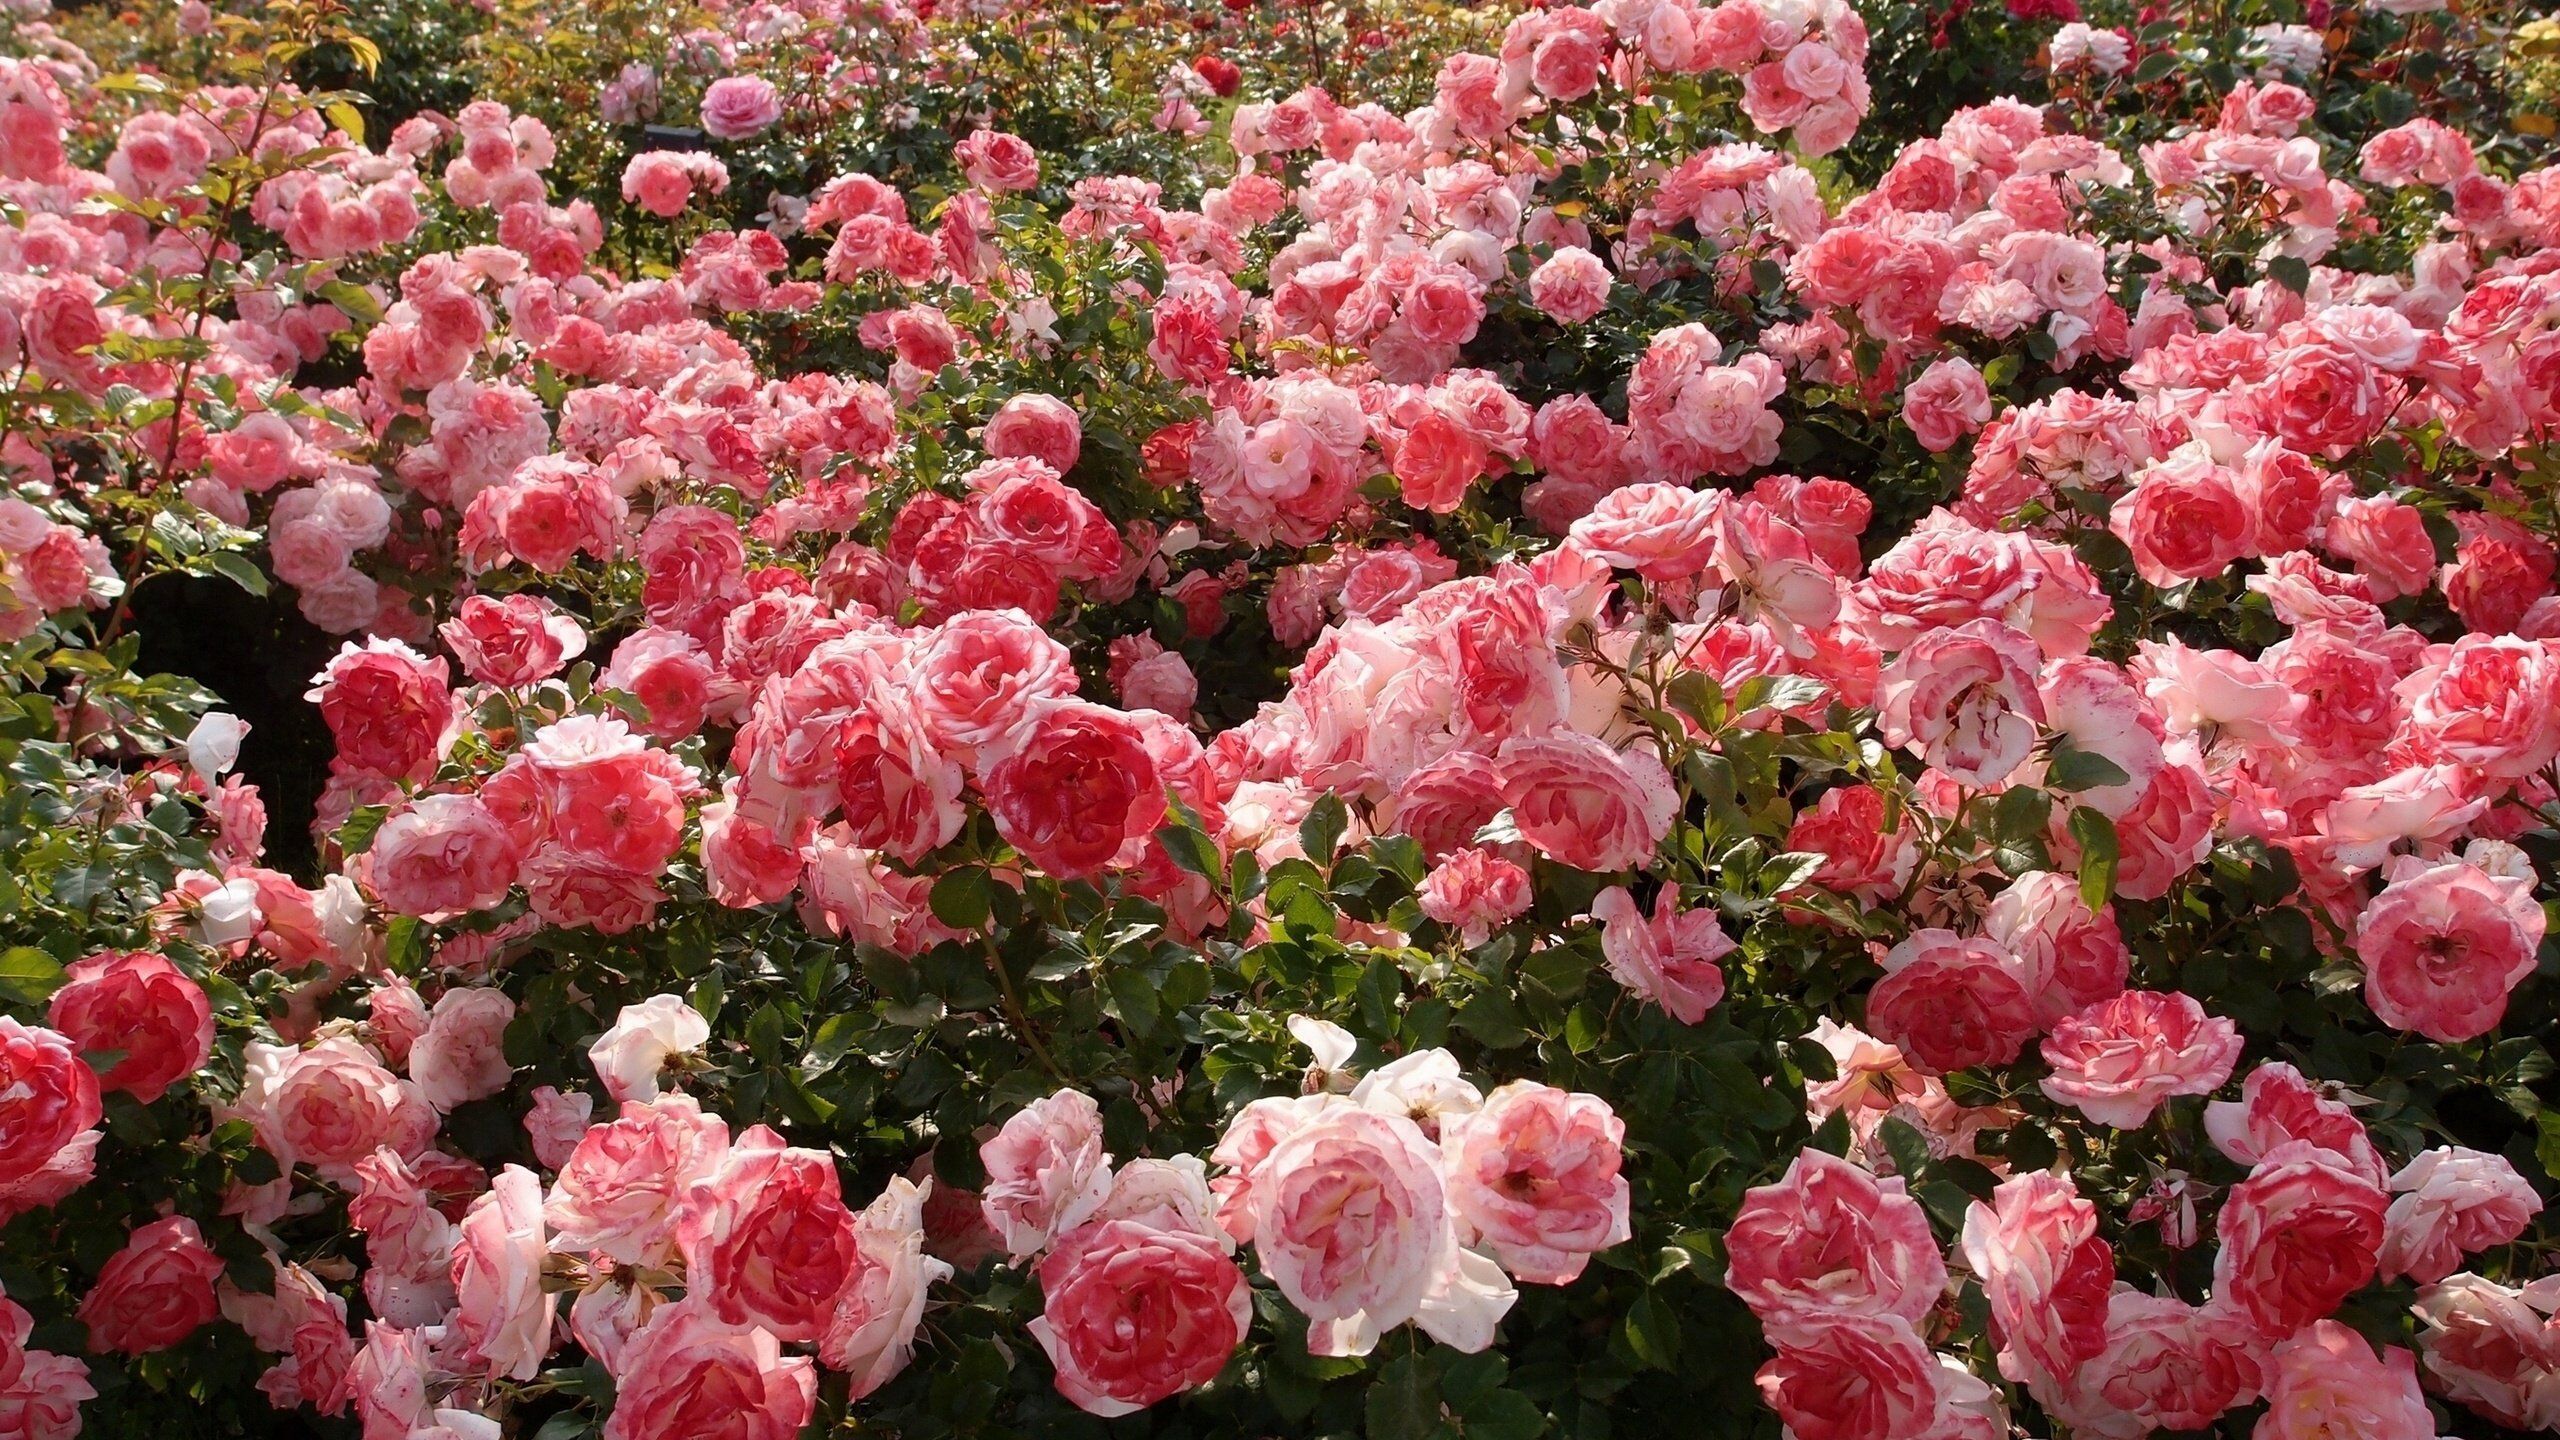 A field of pink roses in bloom - Garden